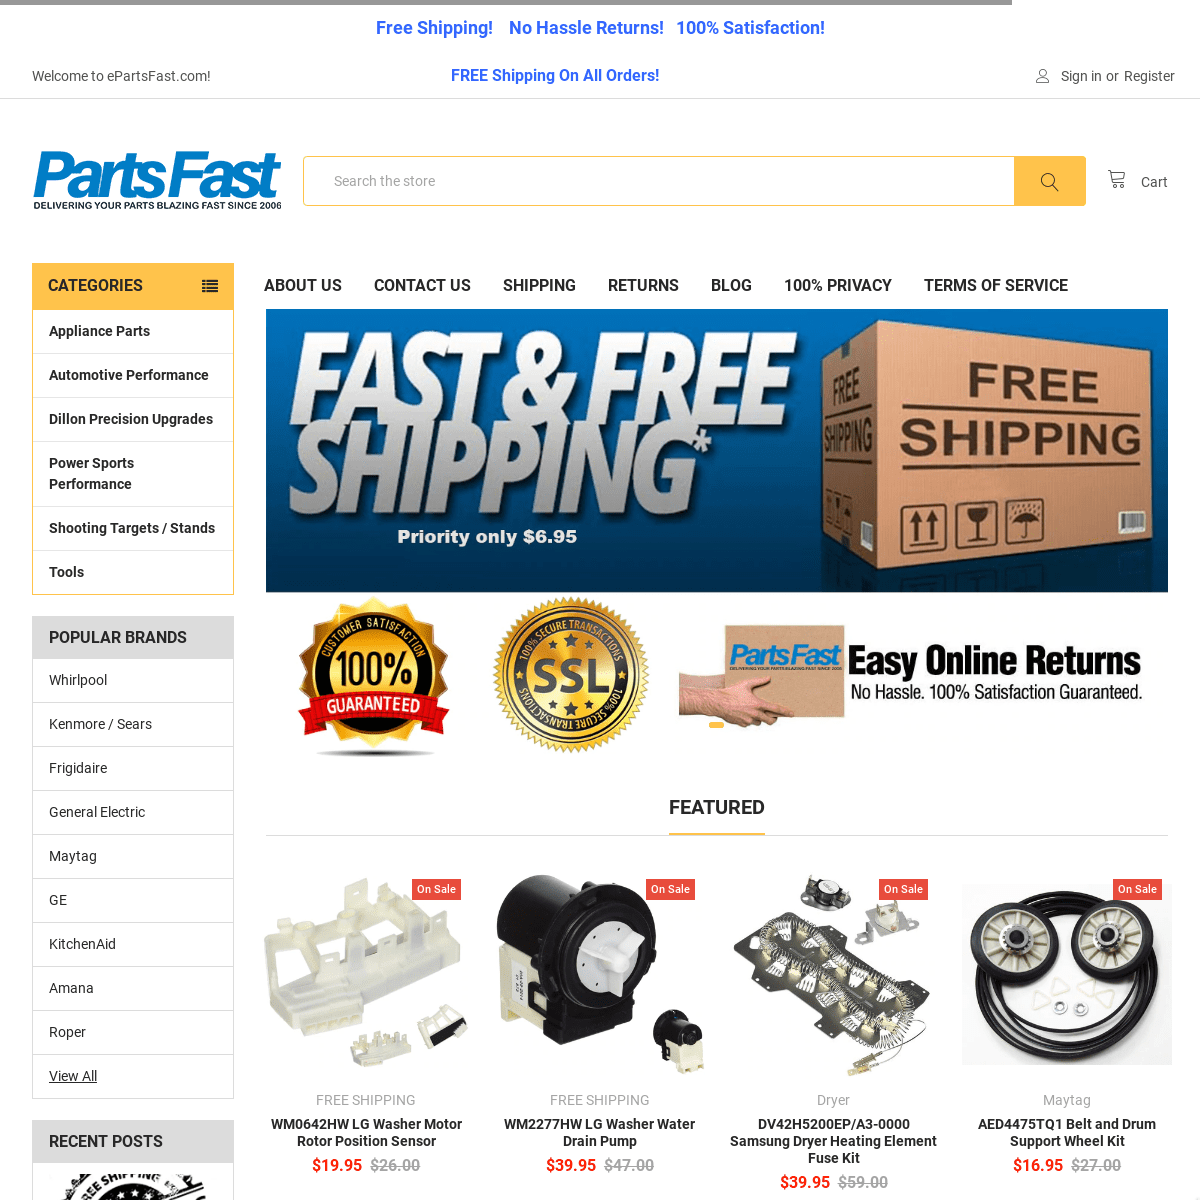 A complete backup of epartsfast.com